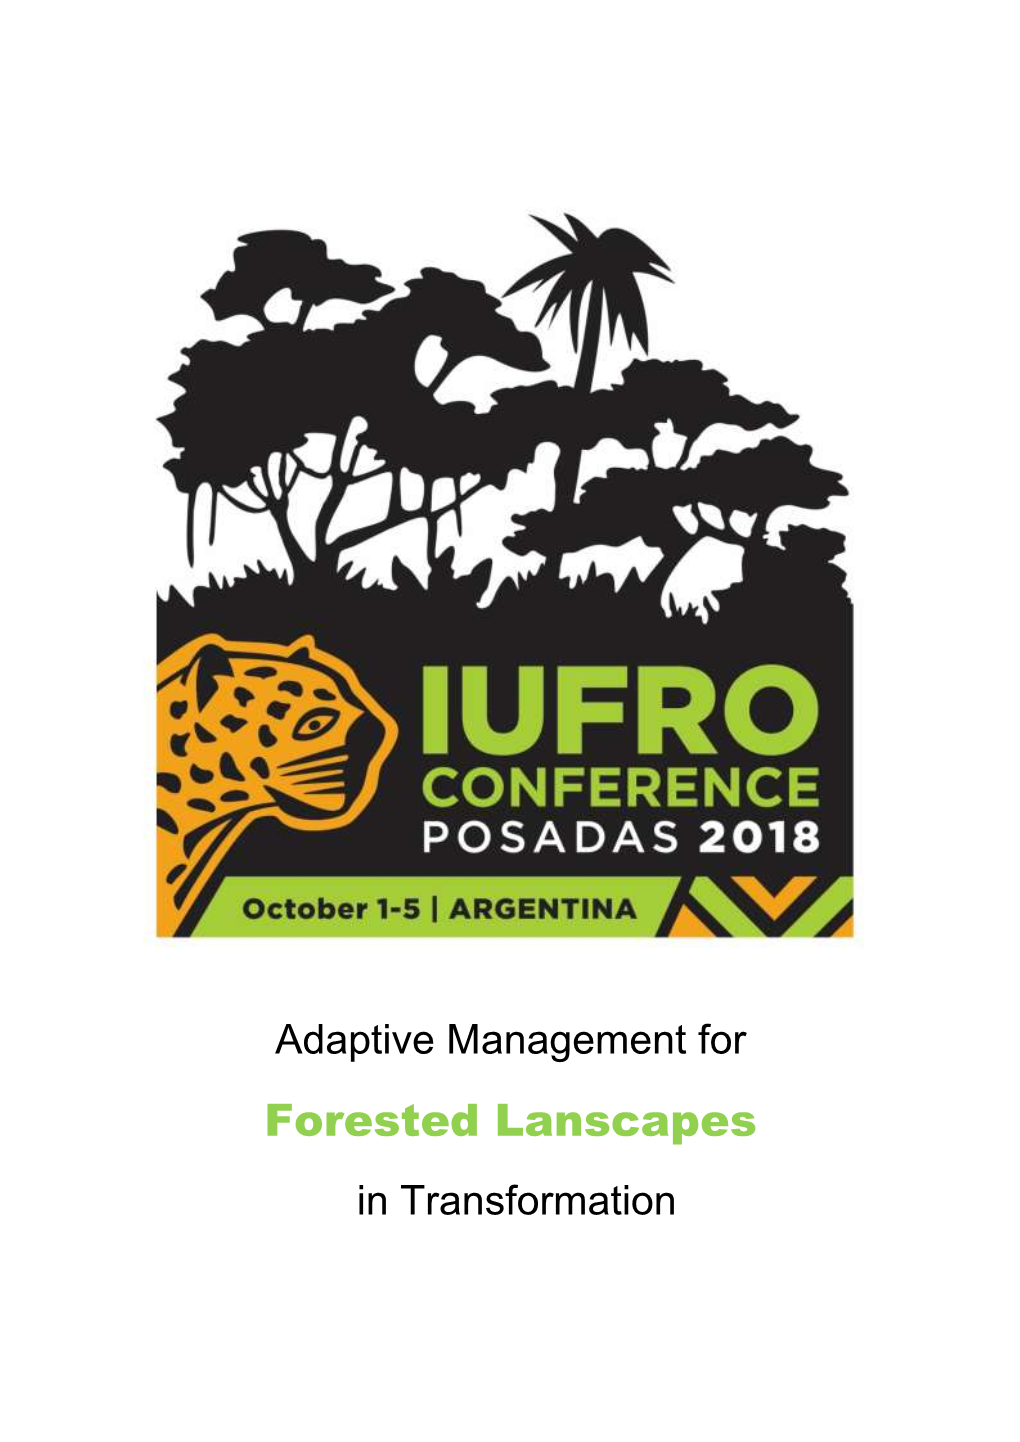 Adaptive Management for Forested Lanscapes in Transformation